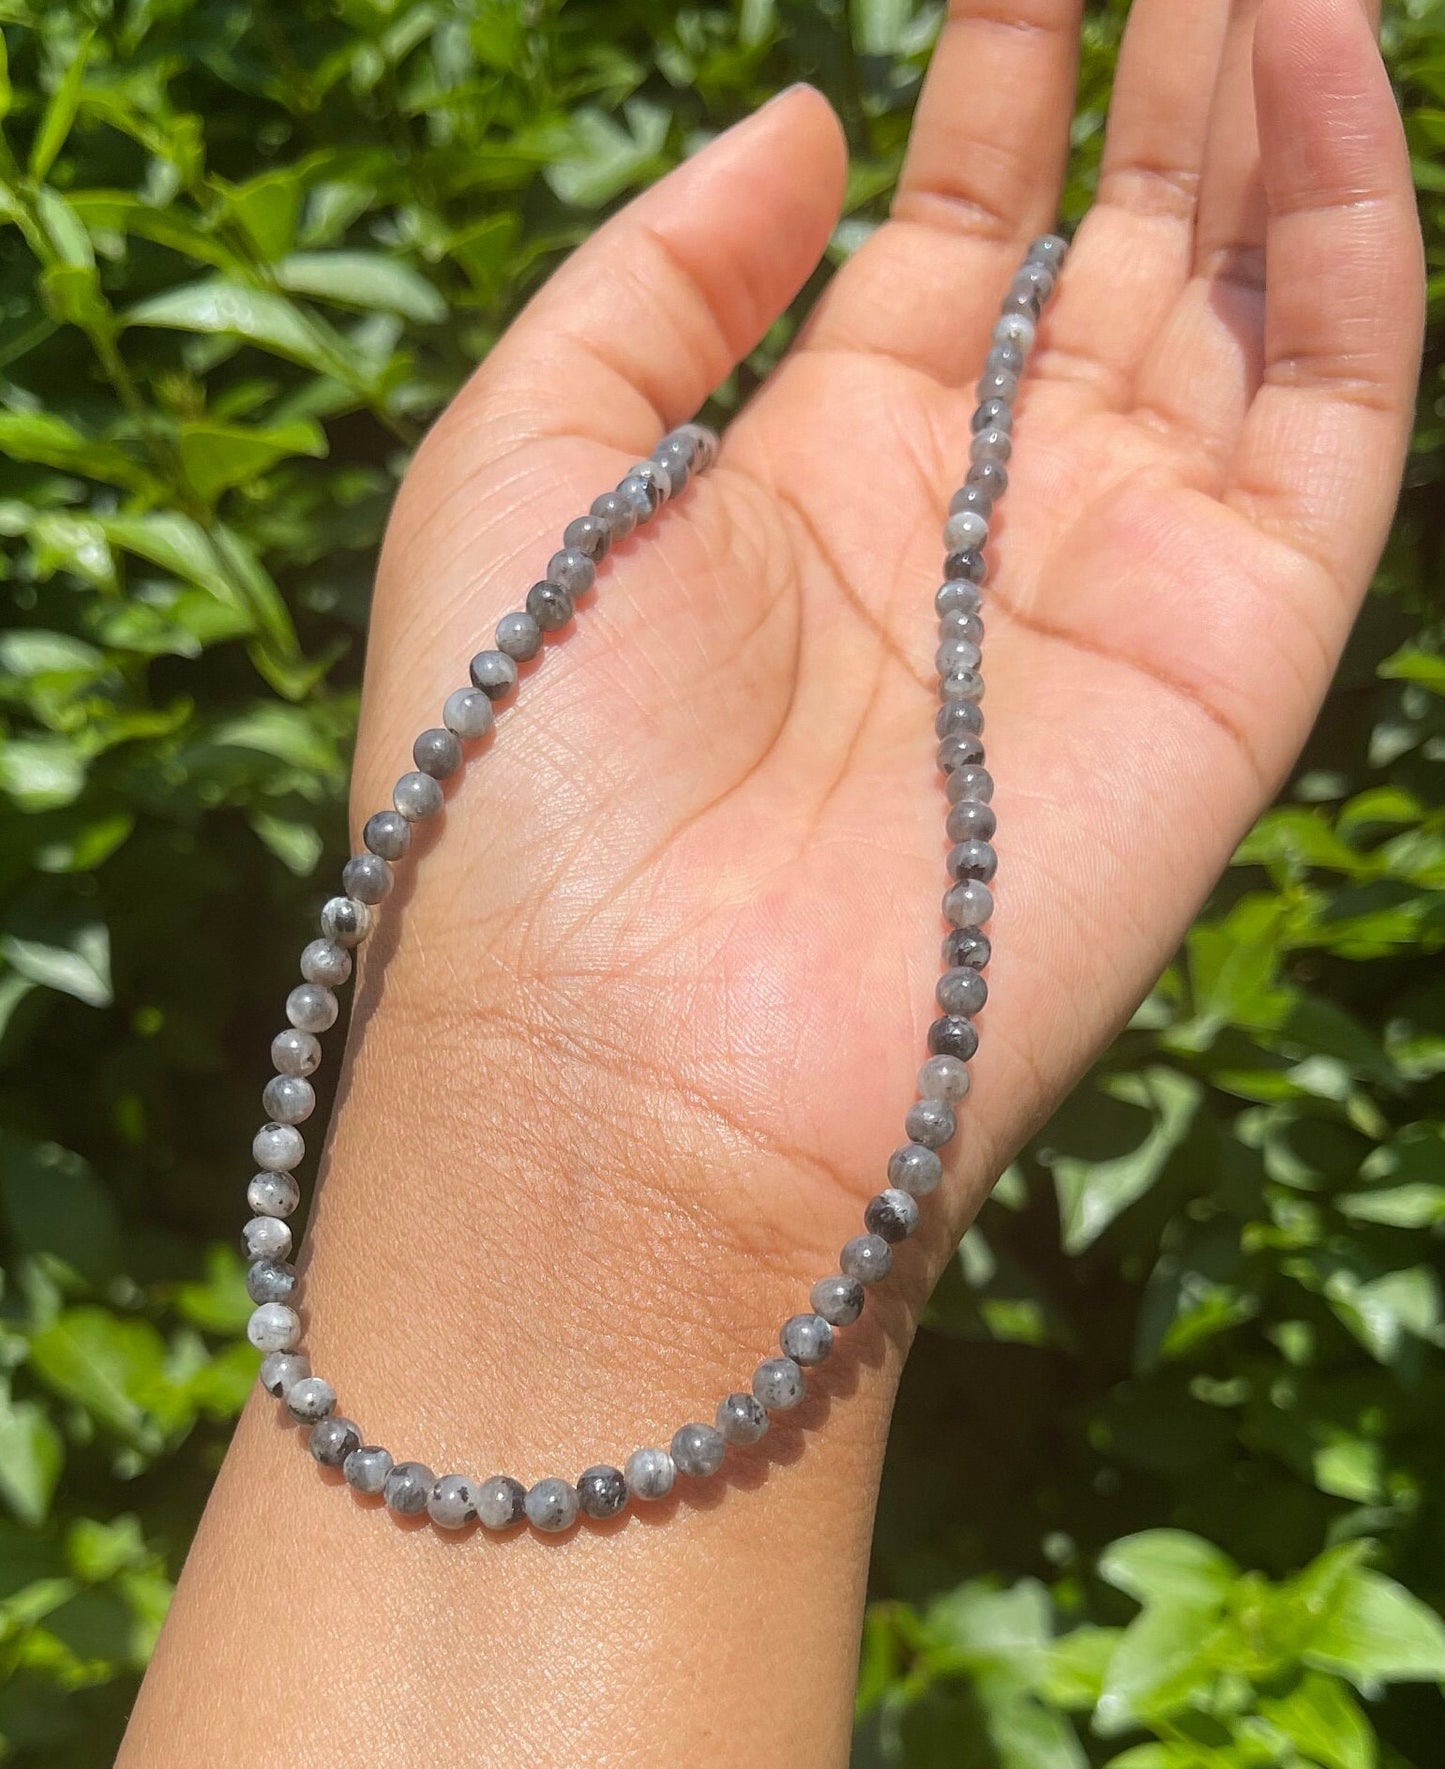 Labradorite Choker, Dainty Grey Crystal Necklace, Gemstone, Healing Crystals, Beaded Necklace, Minimalistic, Gift for Her, Handmade Jewelry